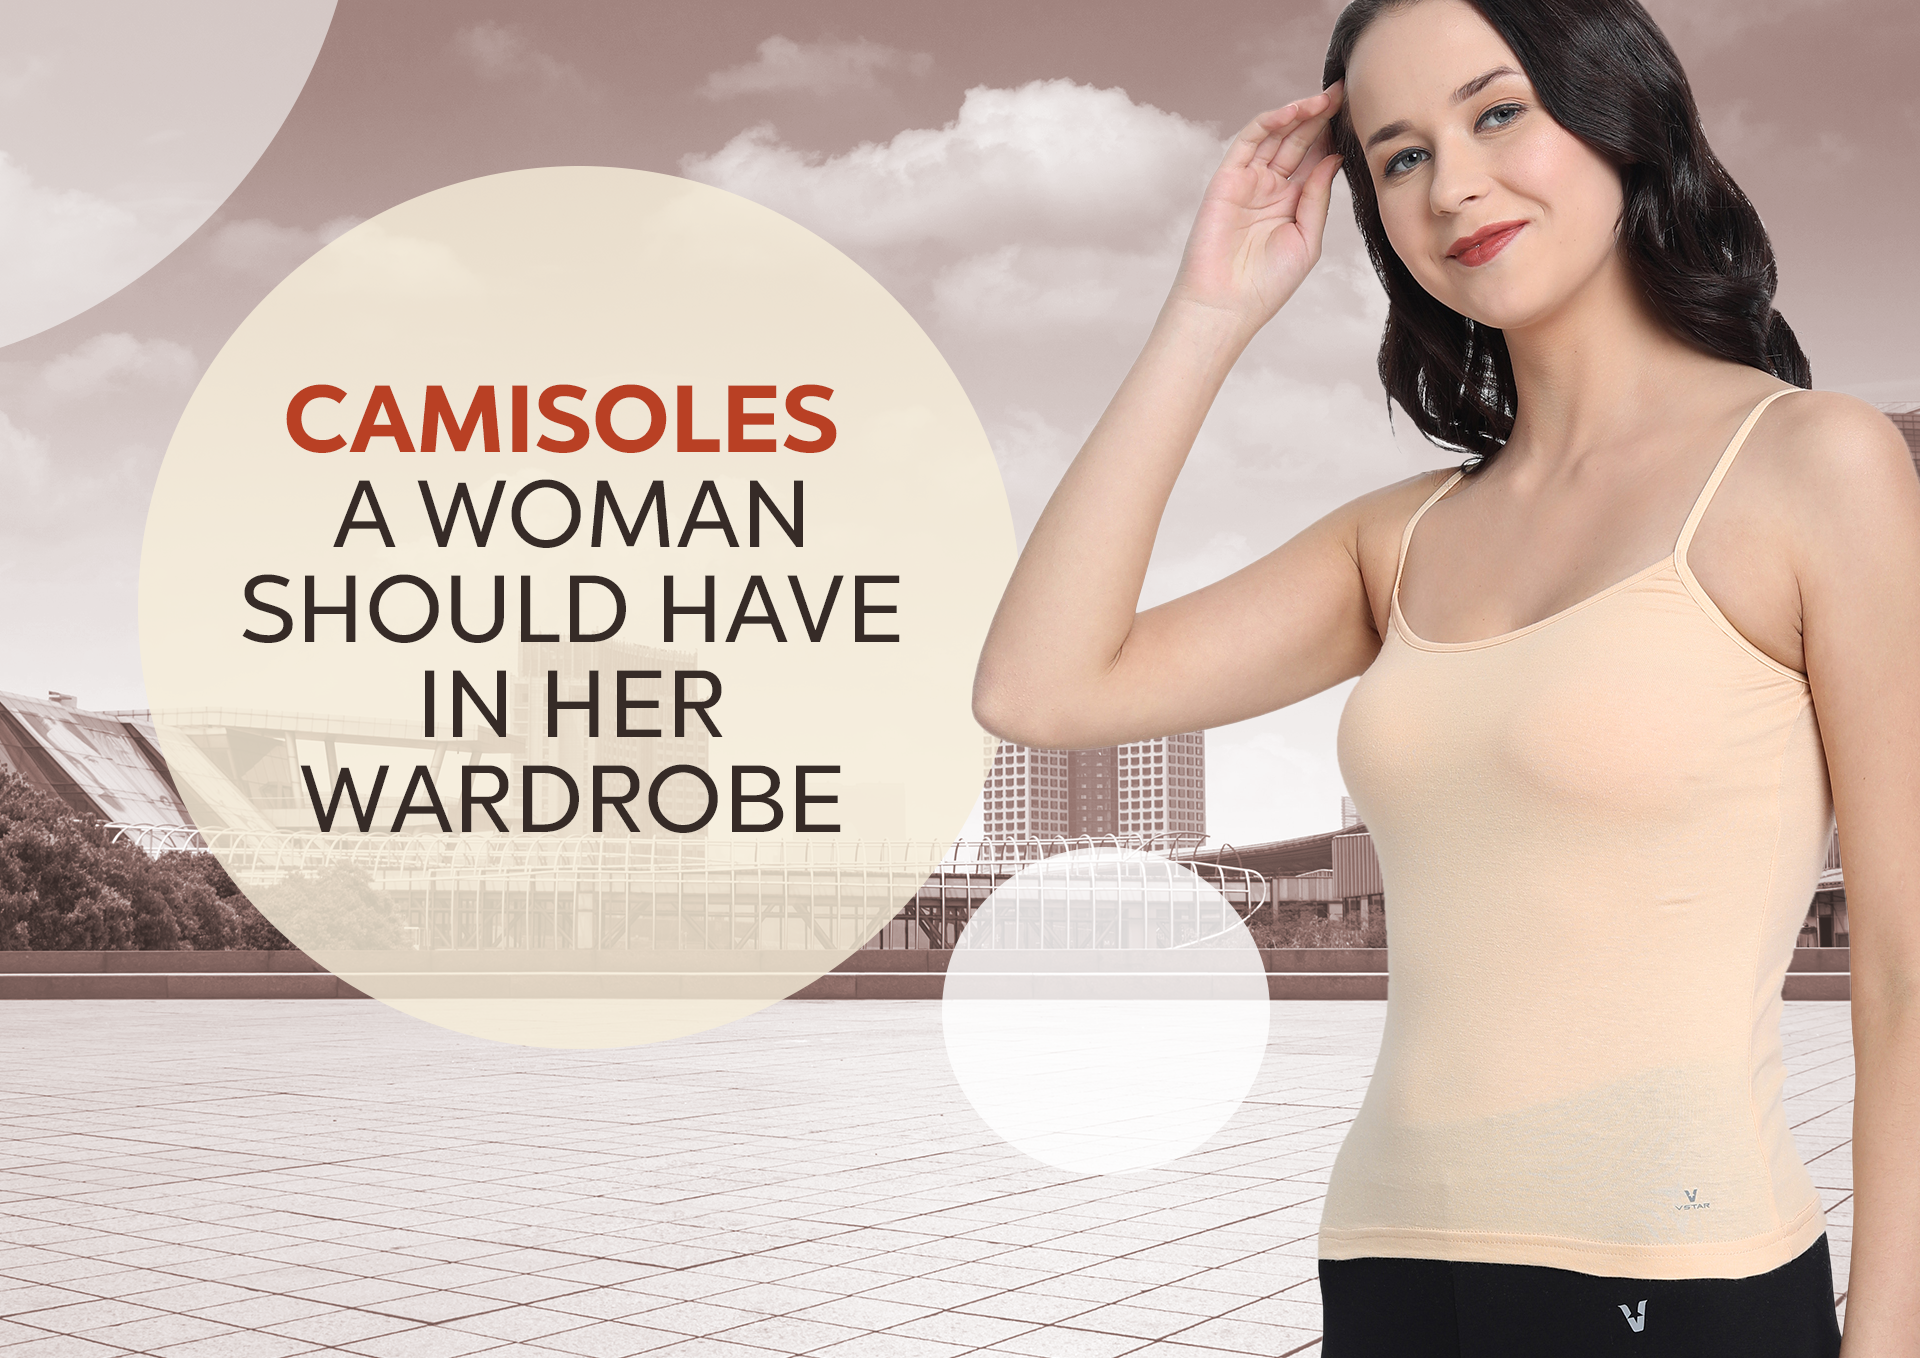 Camisoles a Woman Should Have in Her Wardrobe